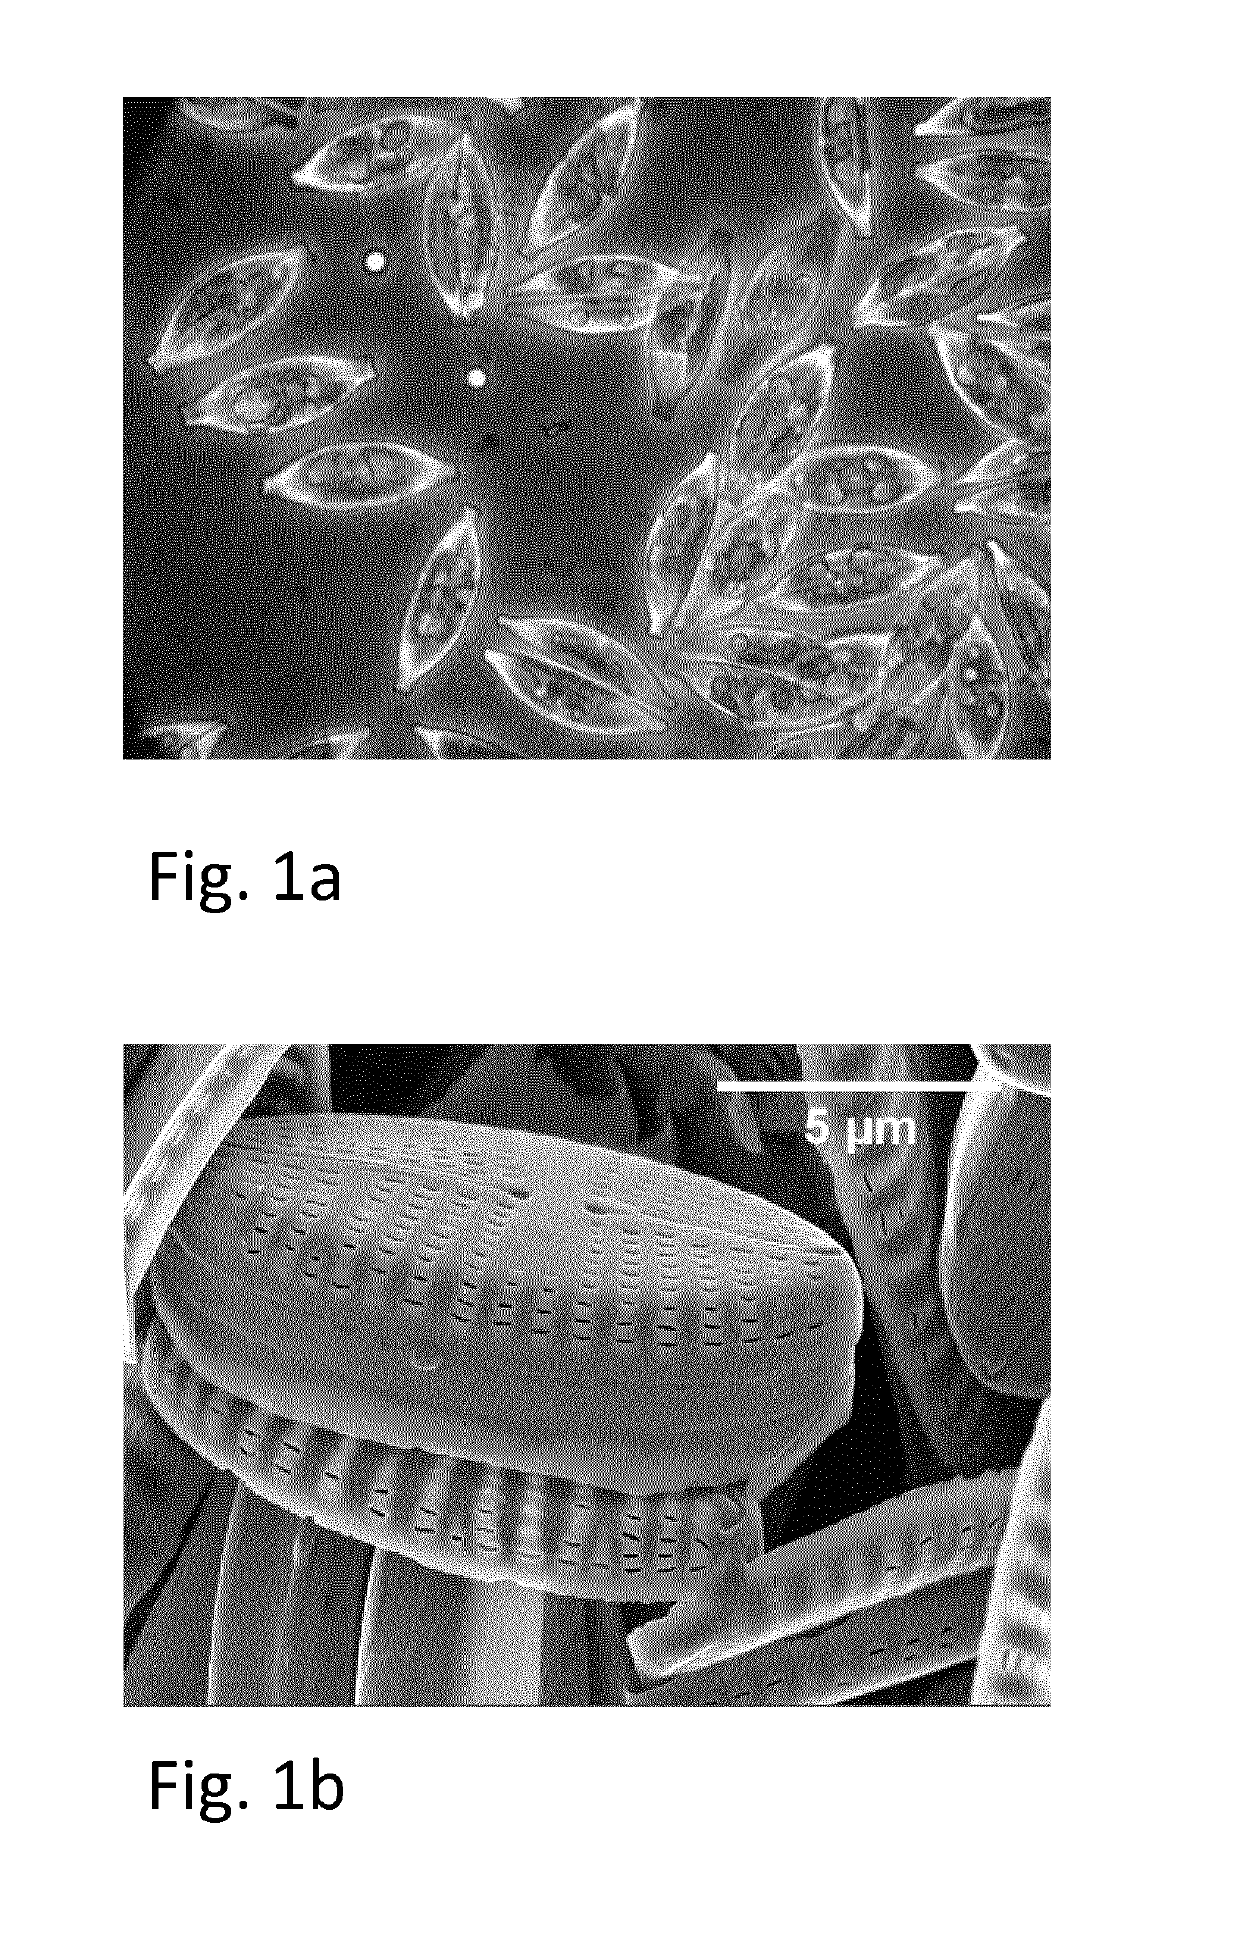 Frustules extracted from benthic pennate diatoms harvested from an industrial biofilm process